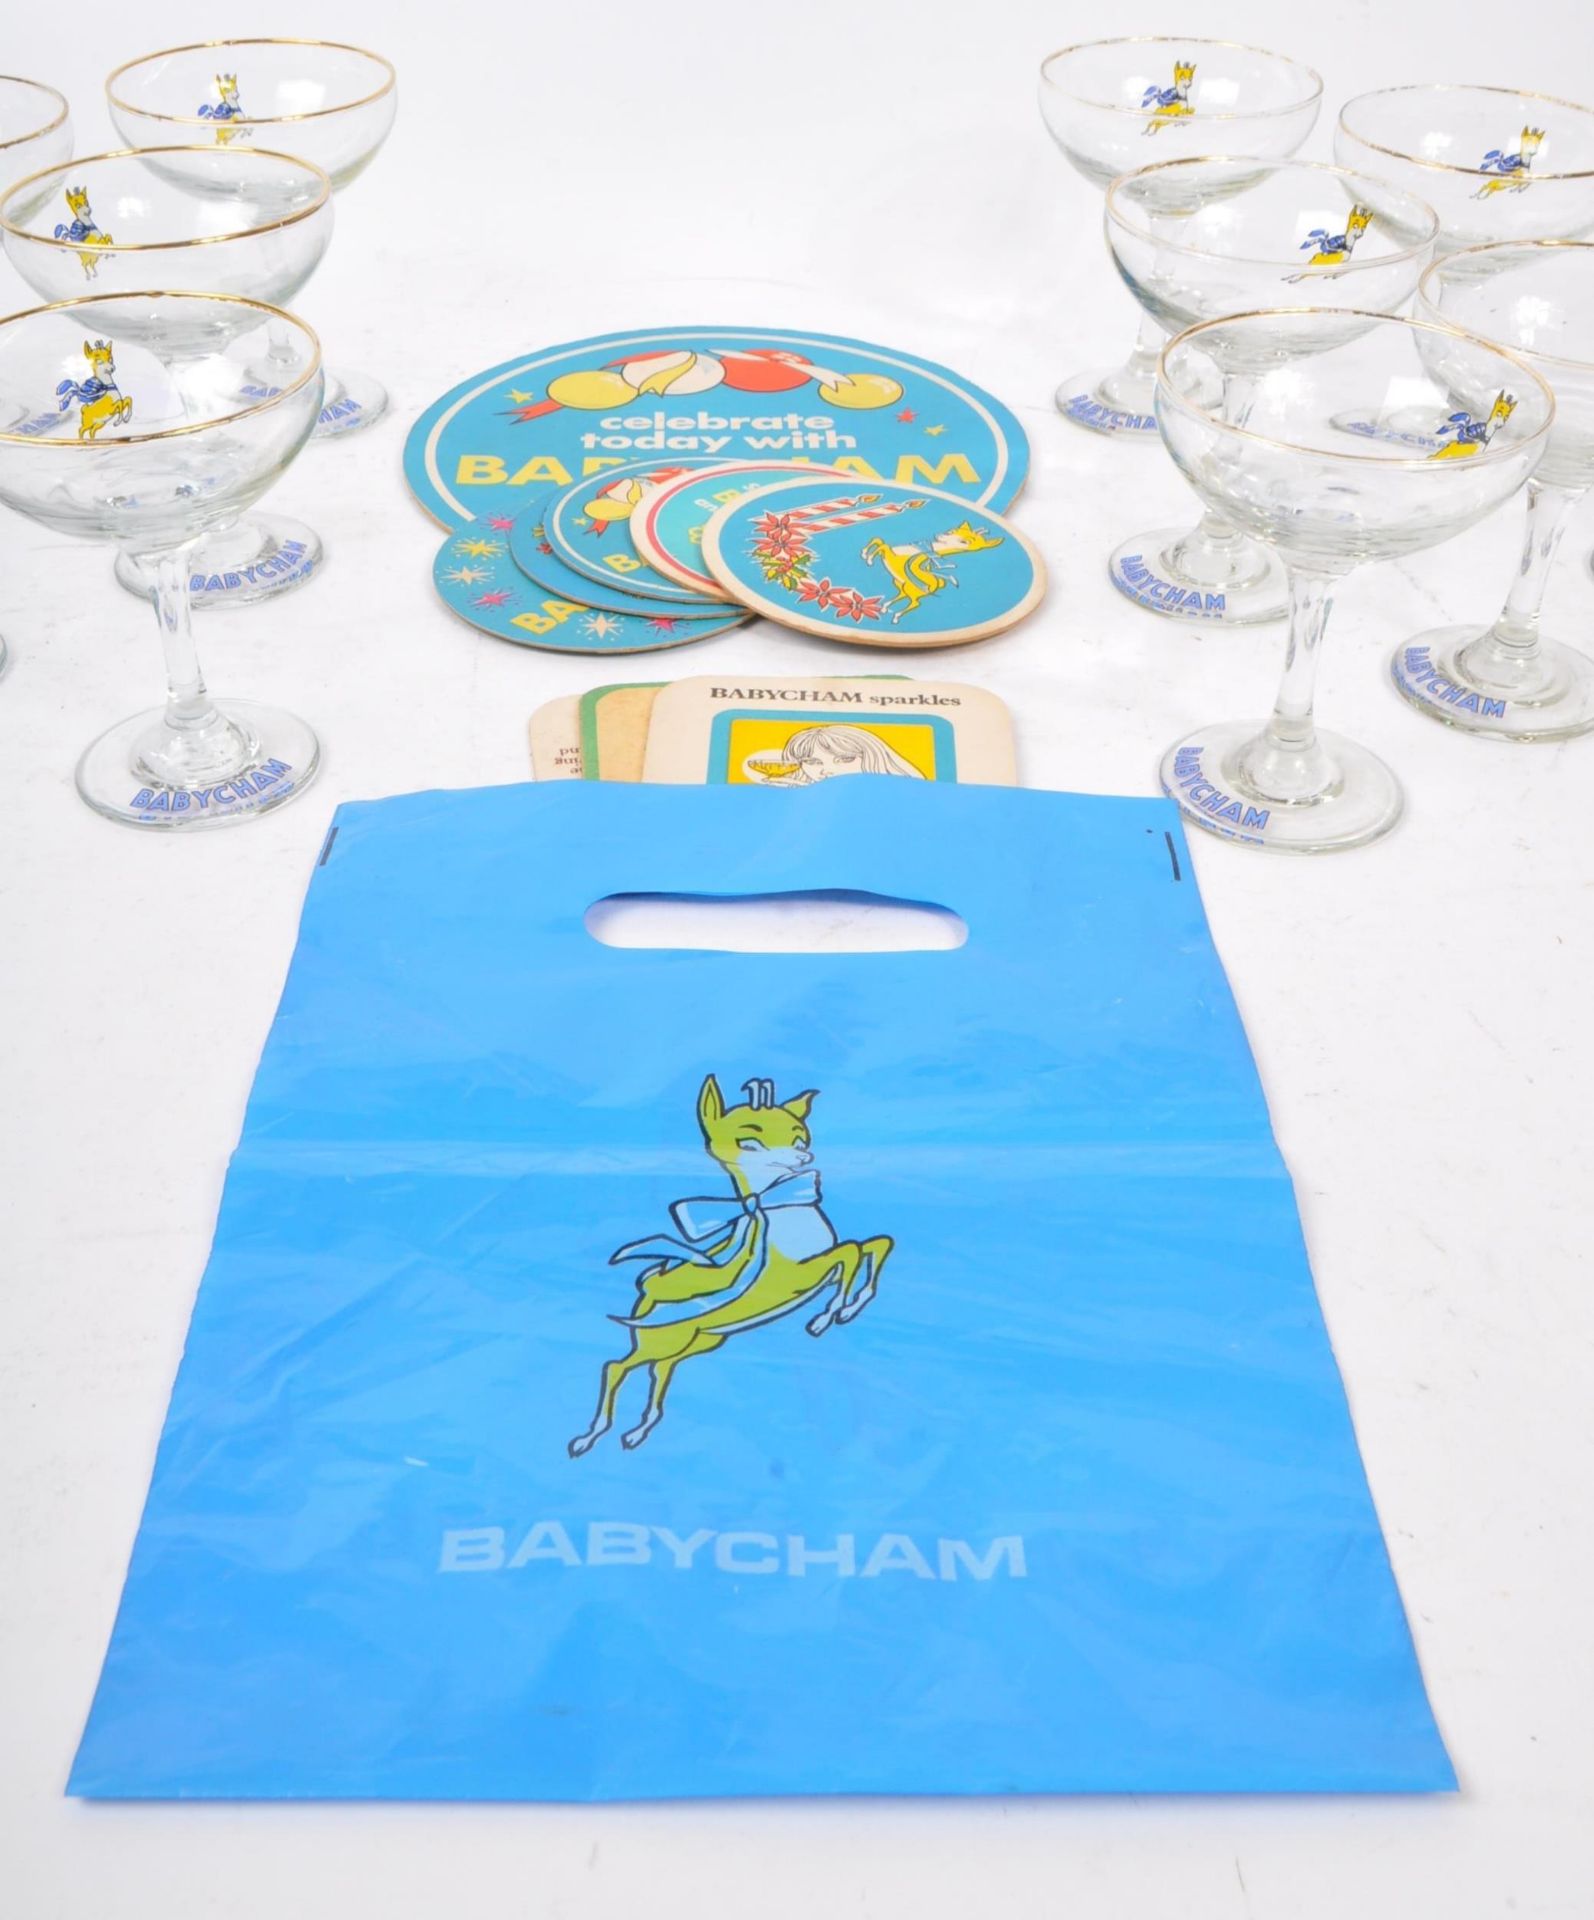 BABYCHAM - COLLECTION OF BRANDED DRINKING GLASSES - Image 5 of 7